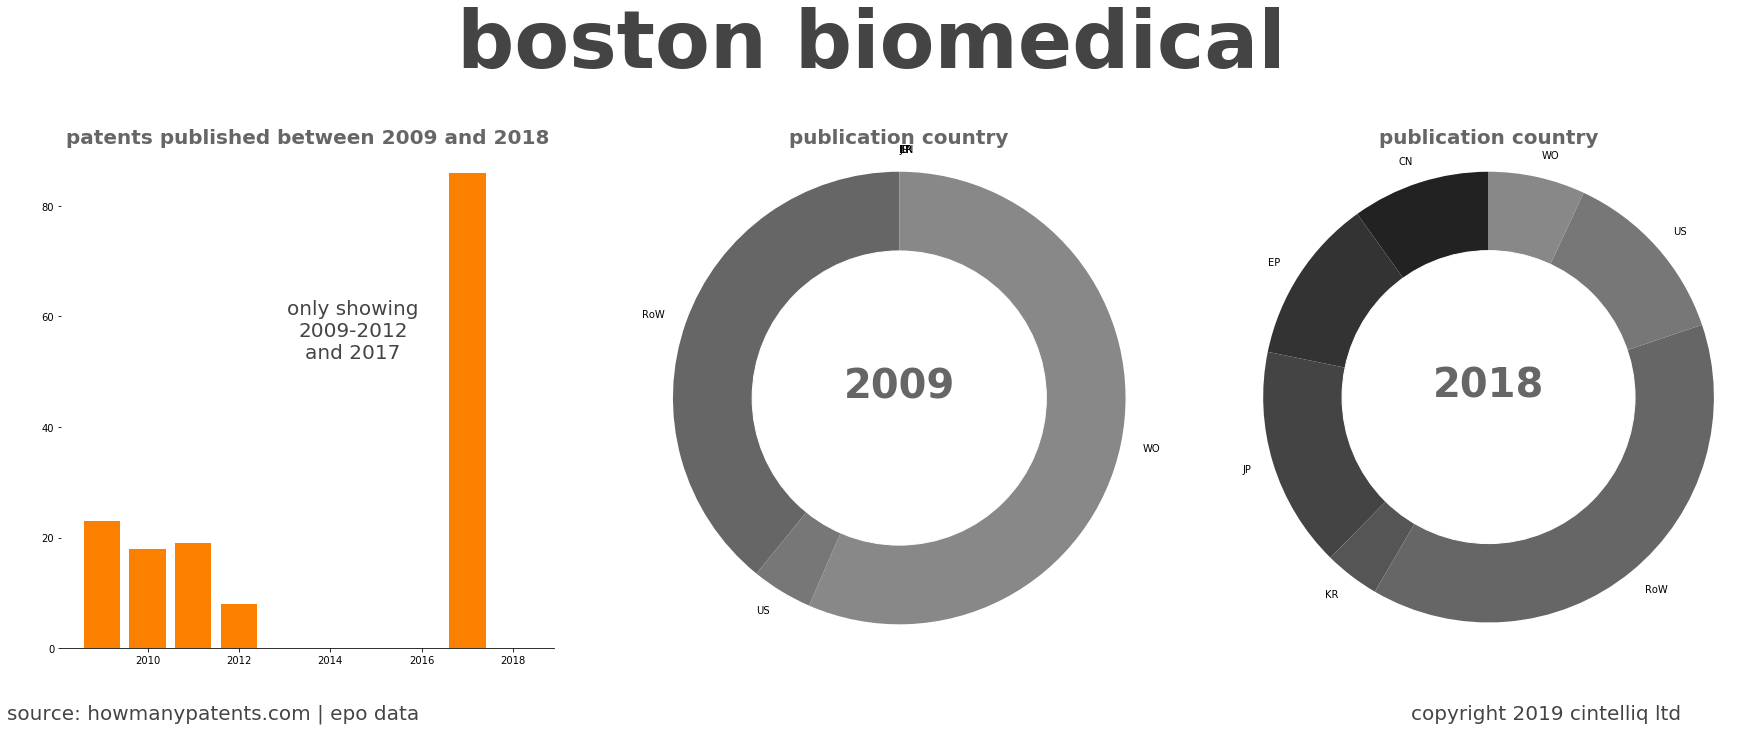 summary of patents for Boston Biomedical